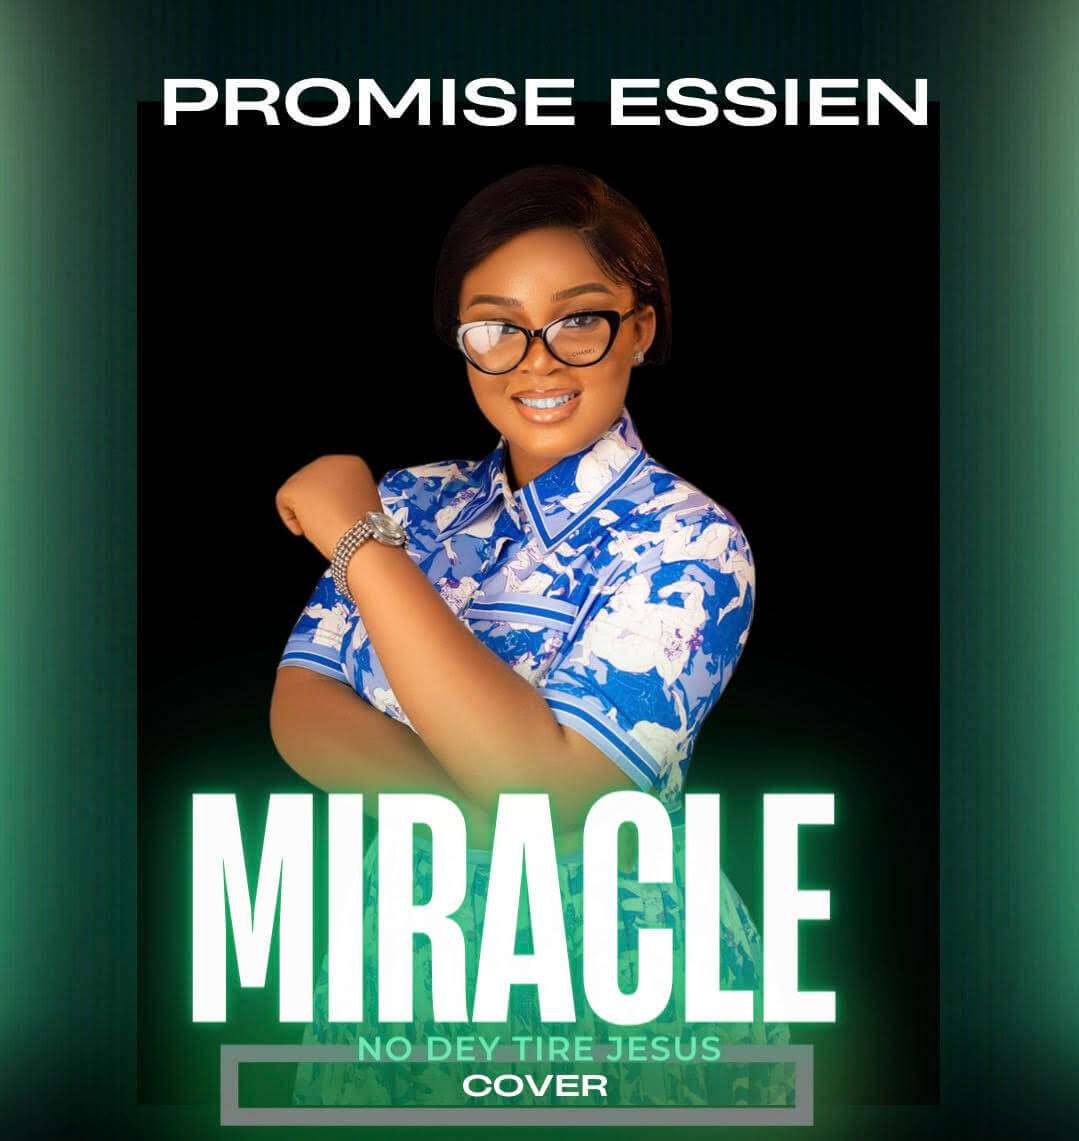 Music VIDEO: Promise Essien - Miracle No Dey Tire Jesus (Cover)